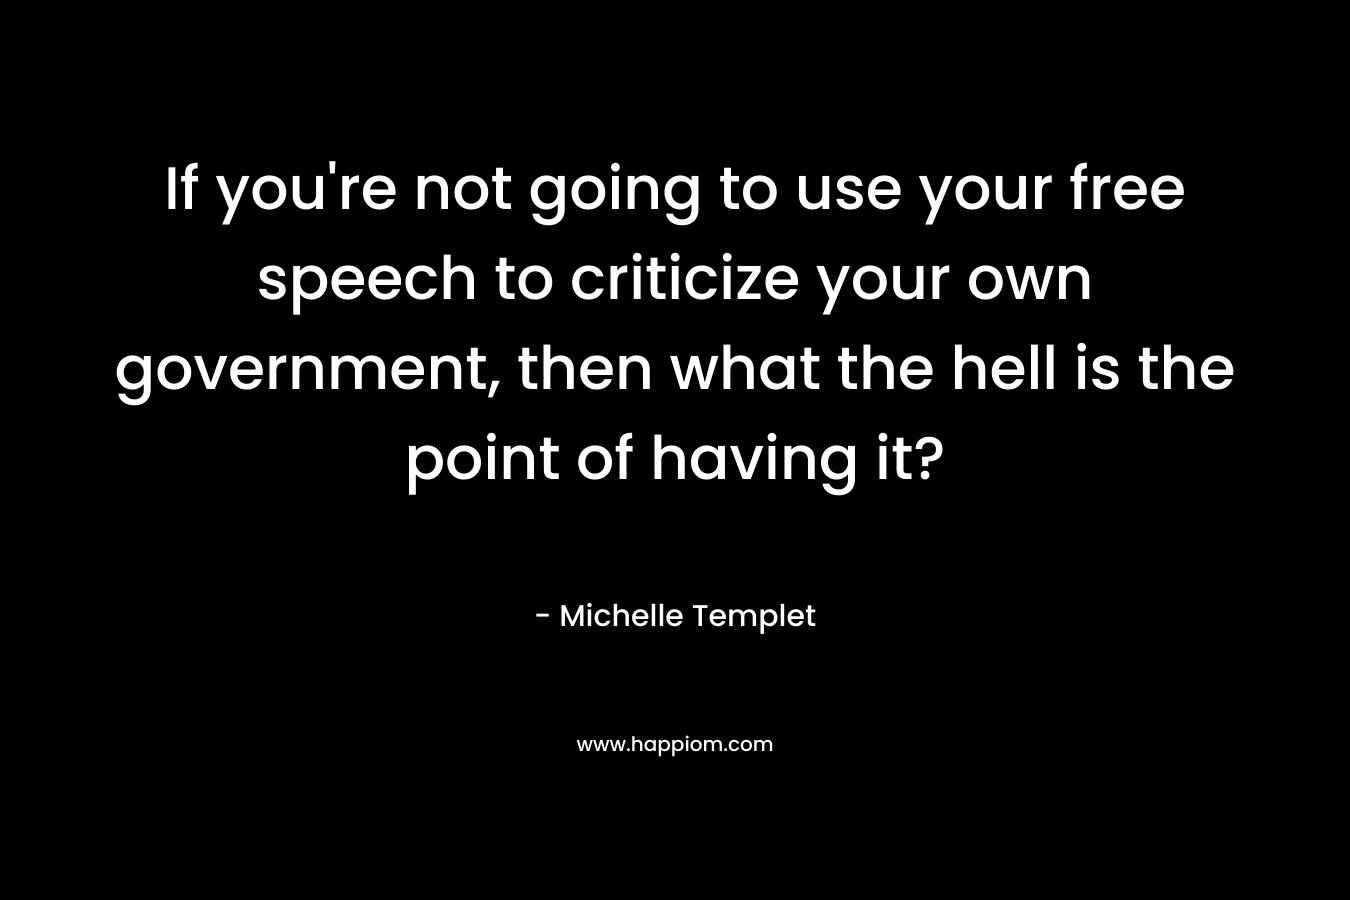 If you're not going to use your free speech to criticize your own government, then what the hell is the point of having it?